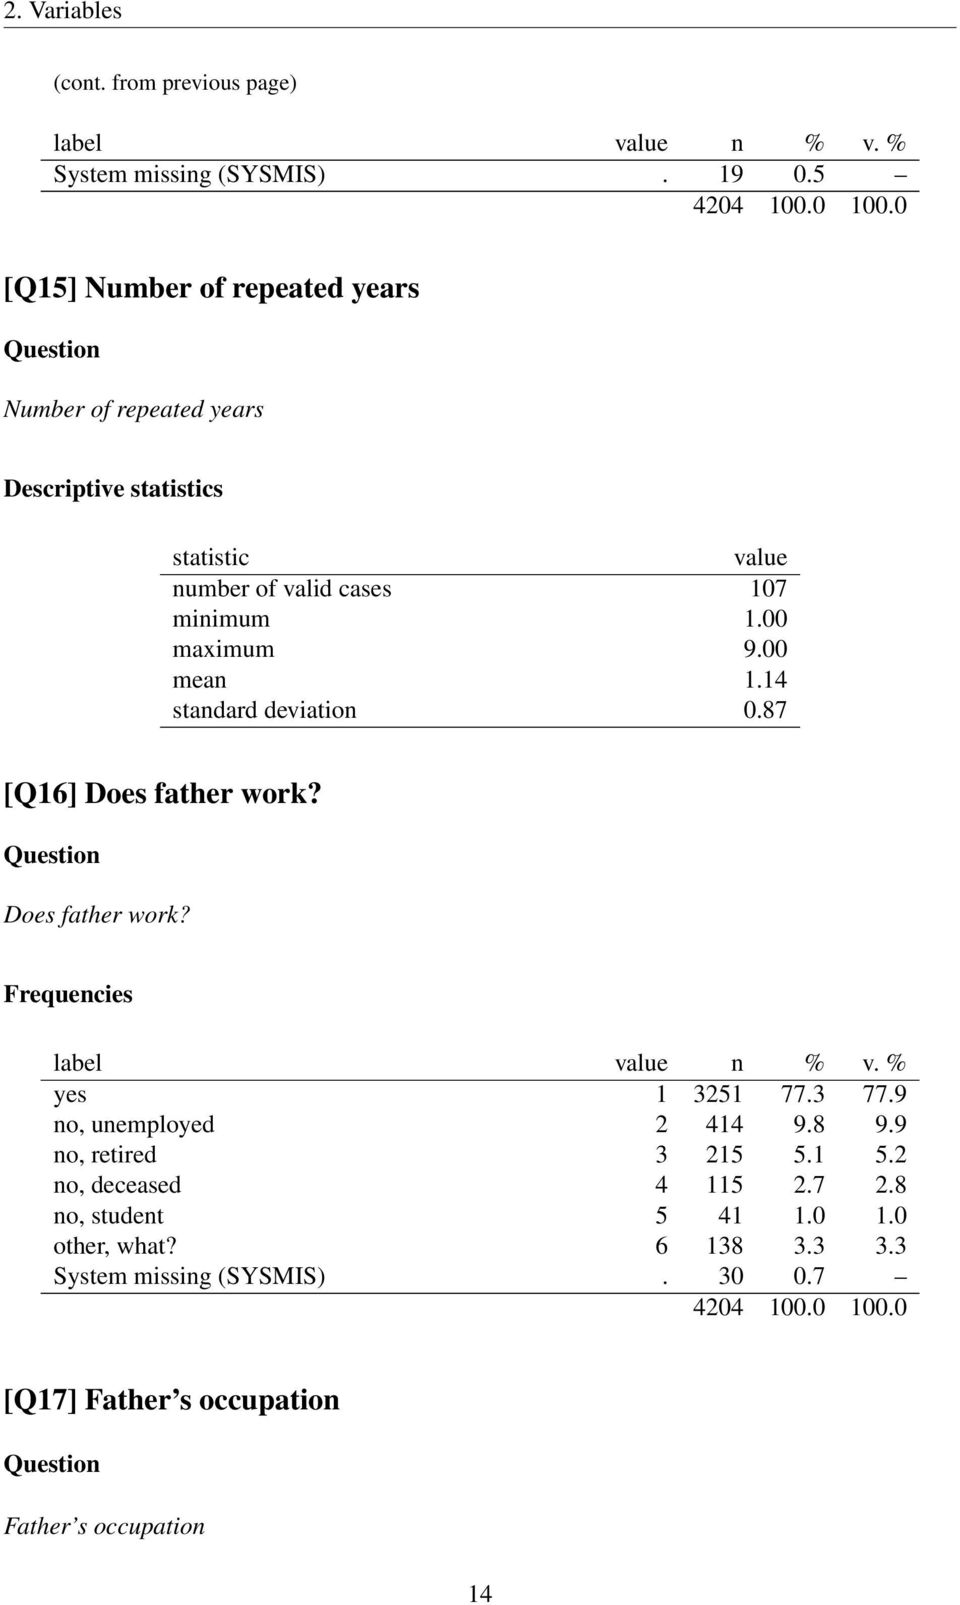 00 maximum 9.00 mean 1.14 standard deviation 0.87 [Q16] Does father work? Does father work? yes 1 3251 77.3 77.